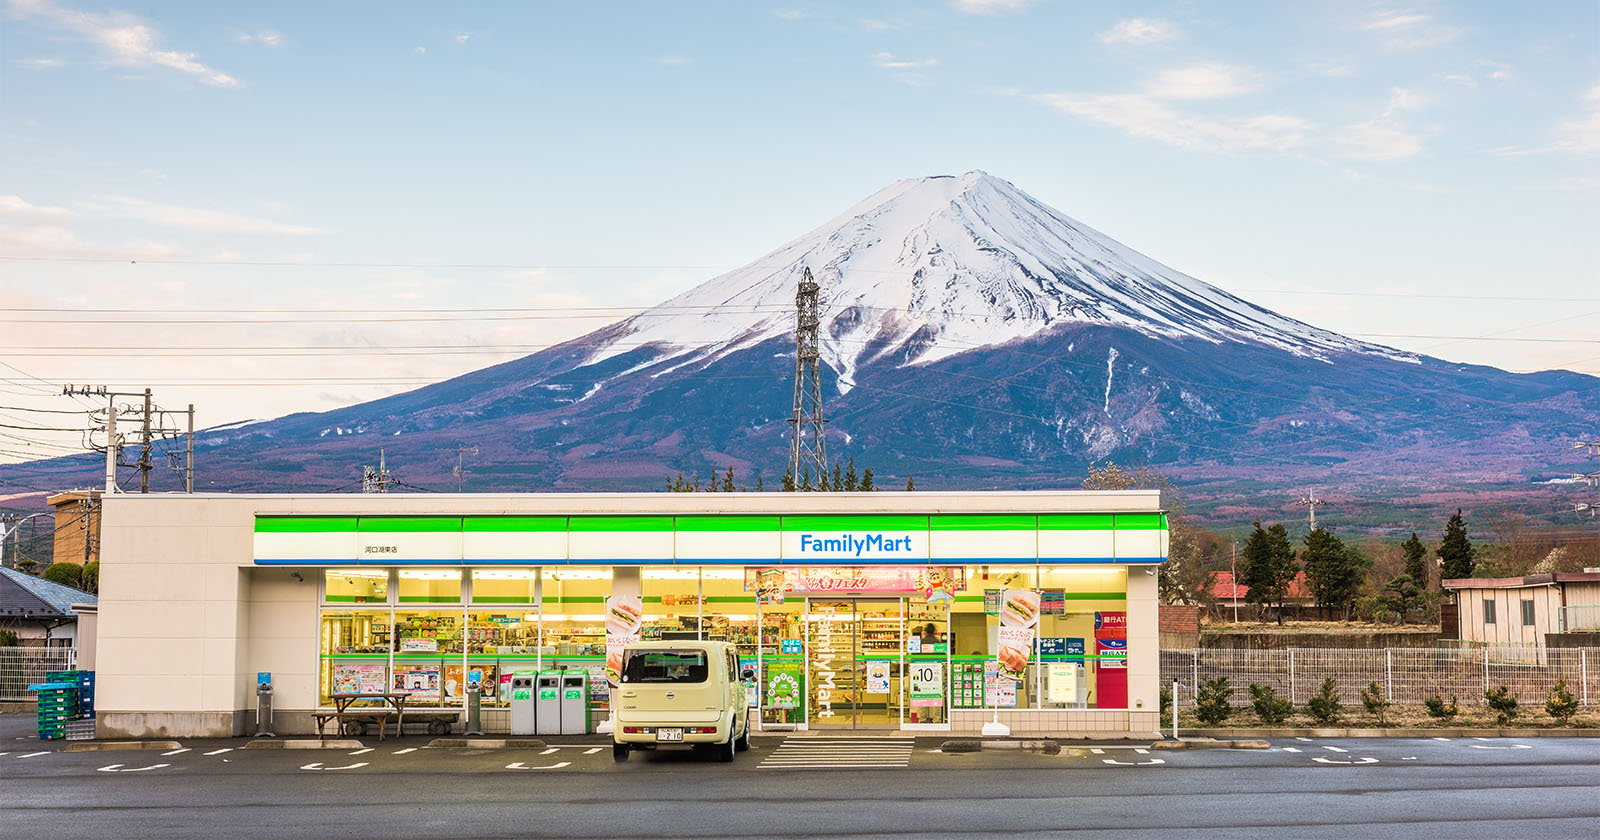 A familymart convenience store in the foreground with mount fuji, its peak covered in snow, majestically rising in the background under a clear sky.